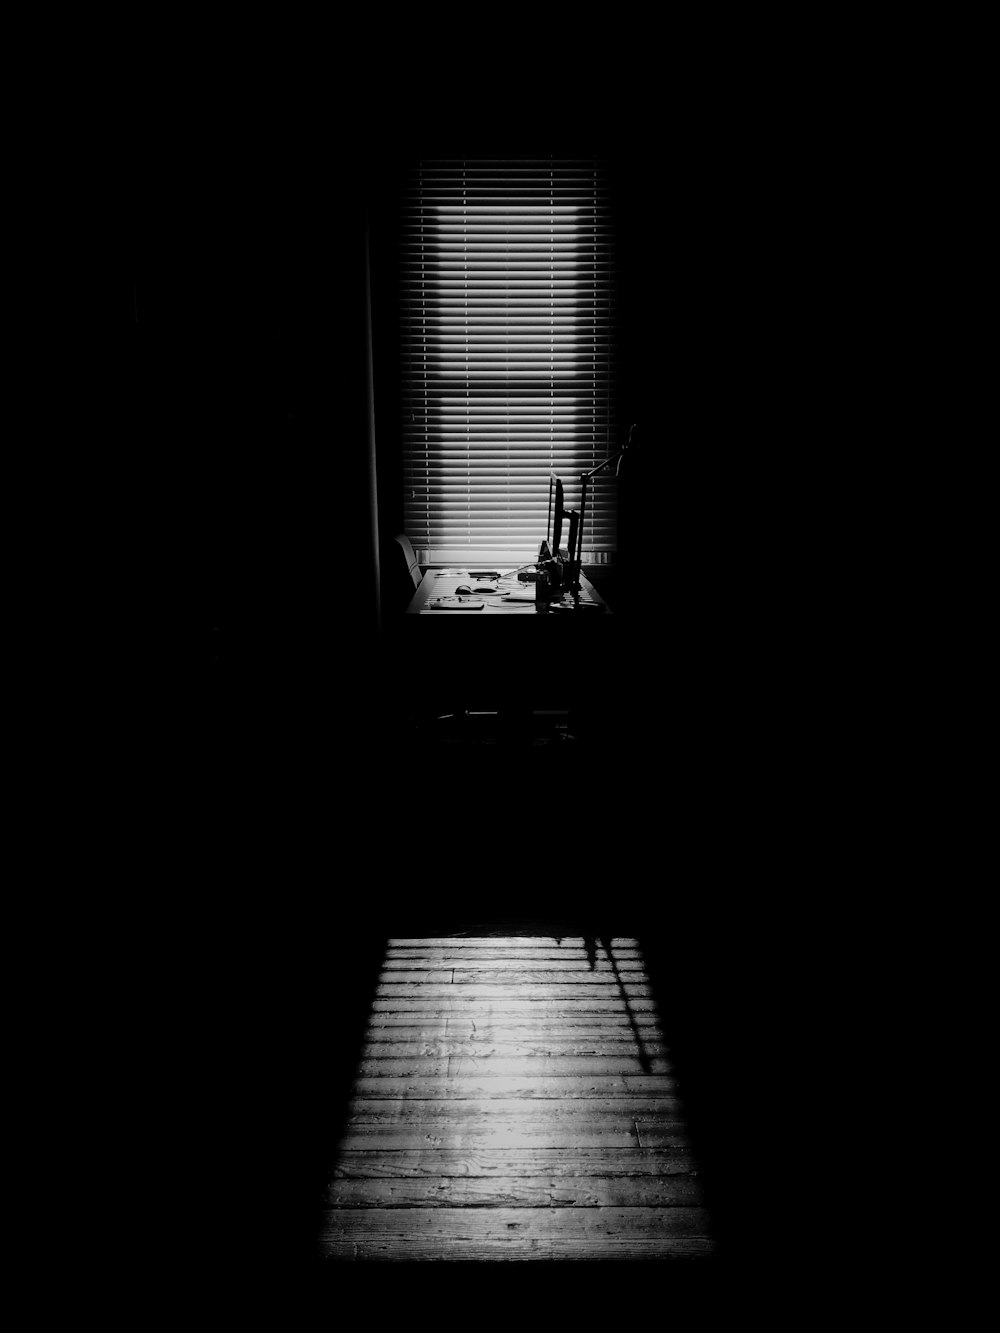 silhouette photography of window with blinds